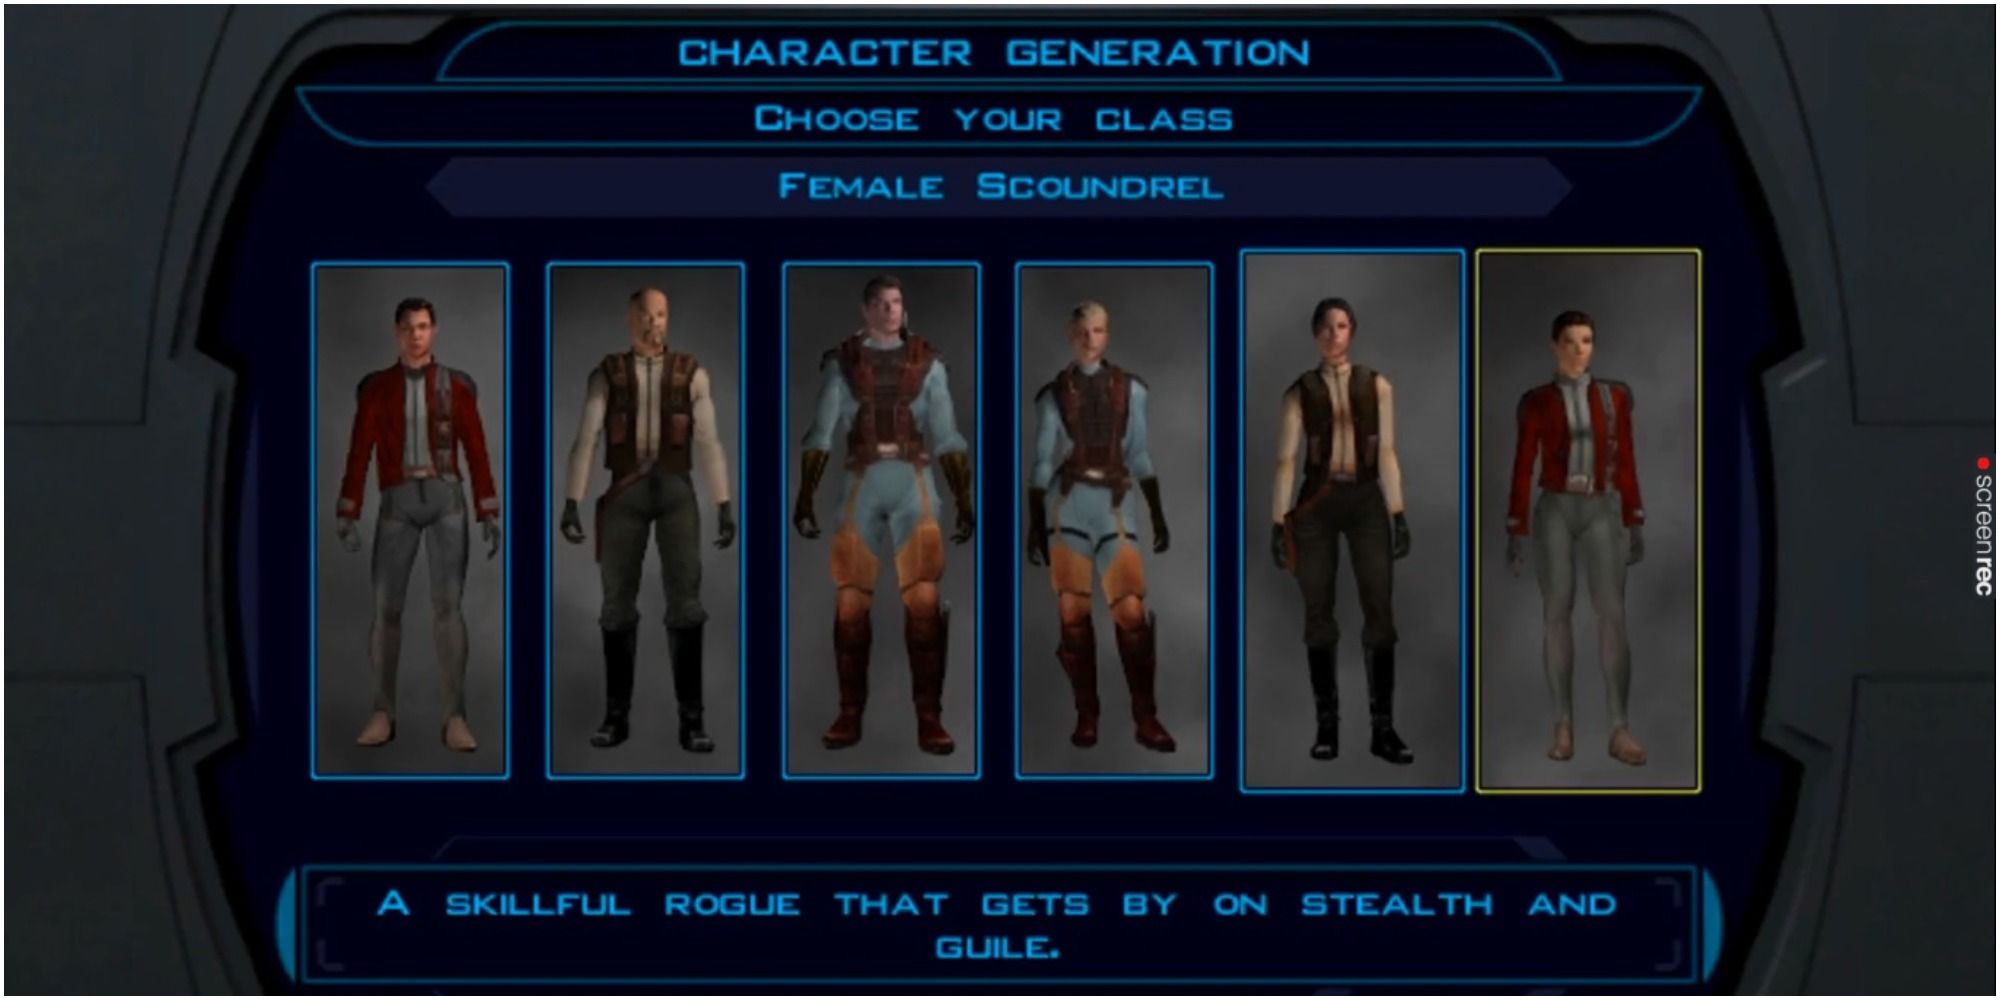 Star Wars Knights of the Old Republic female Scoundrel class